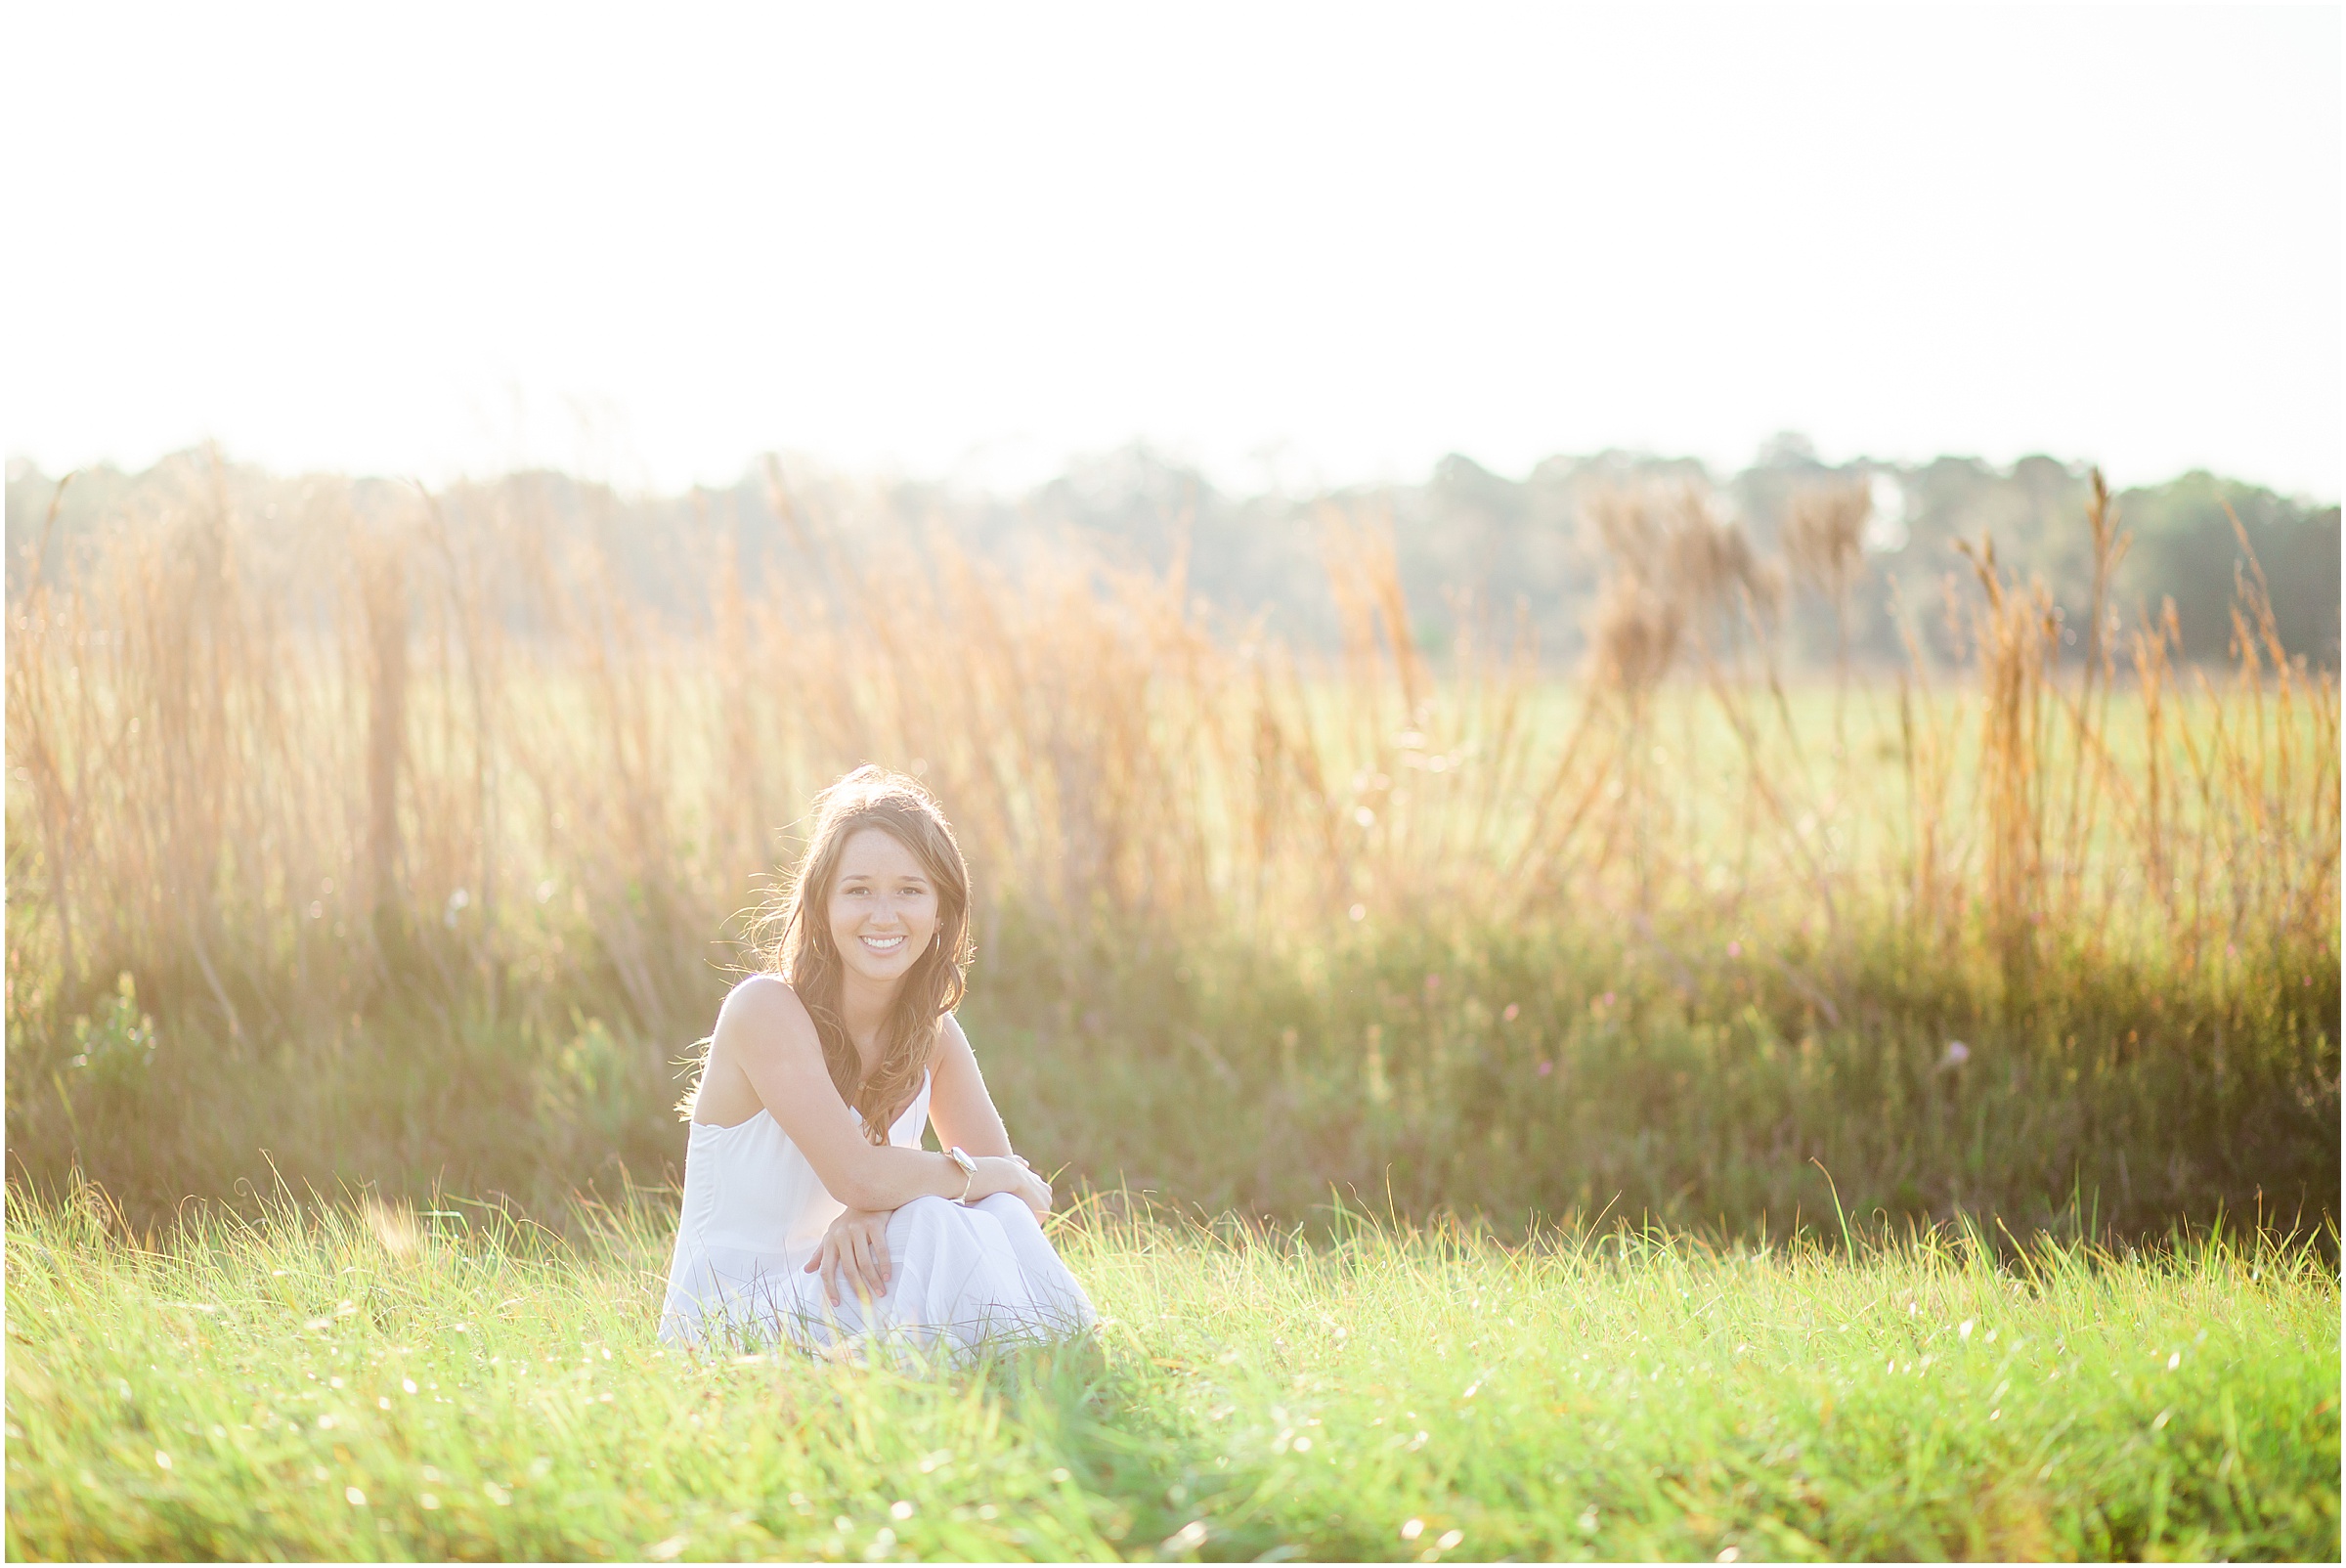 2019 Hardee High School Senior, Claire, poses in a golden grassy field in Wauchula FL at sunset.